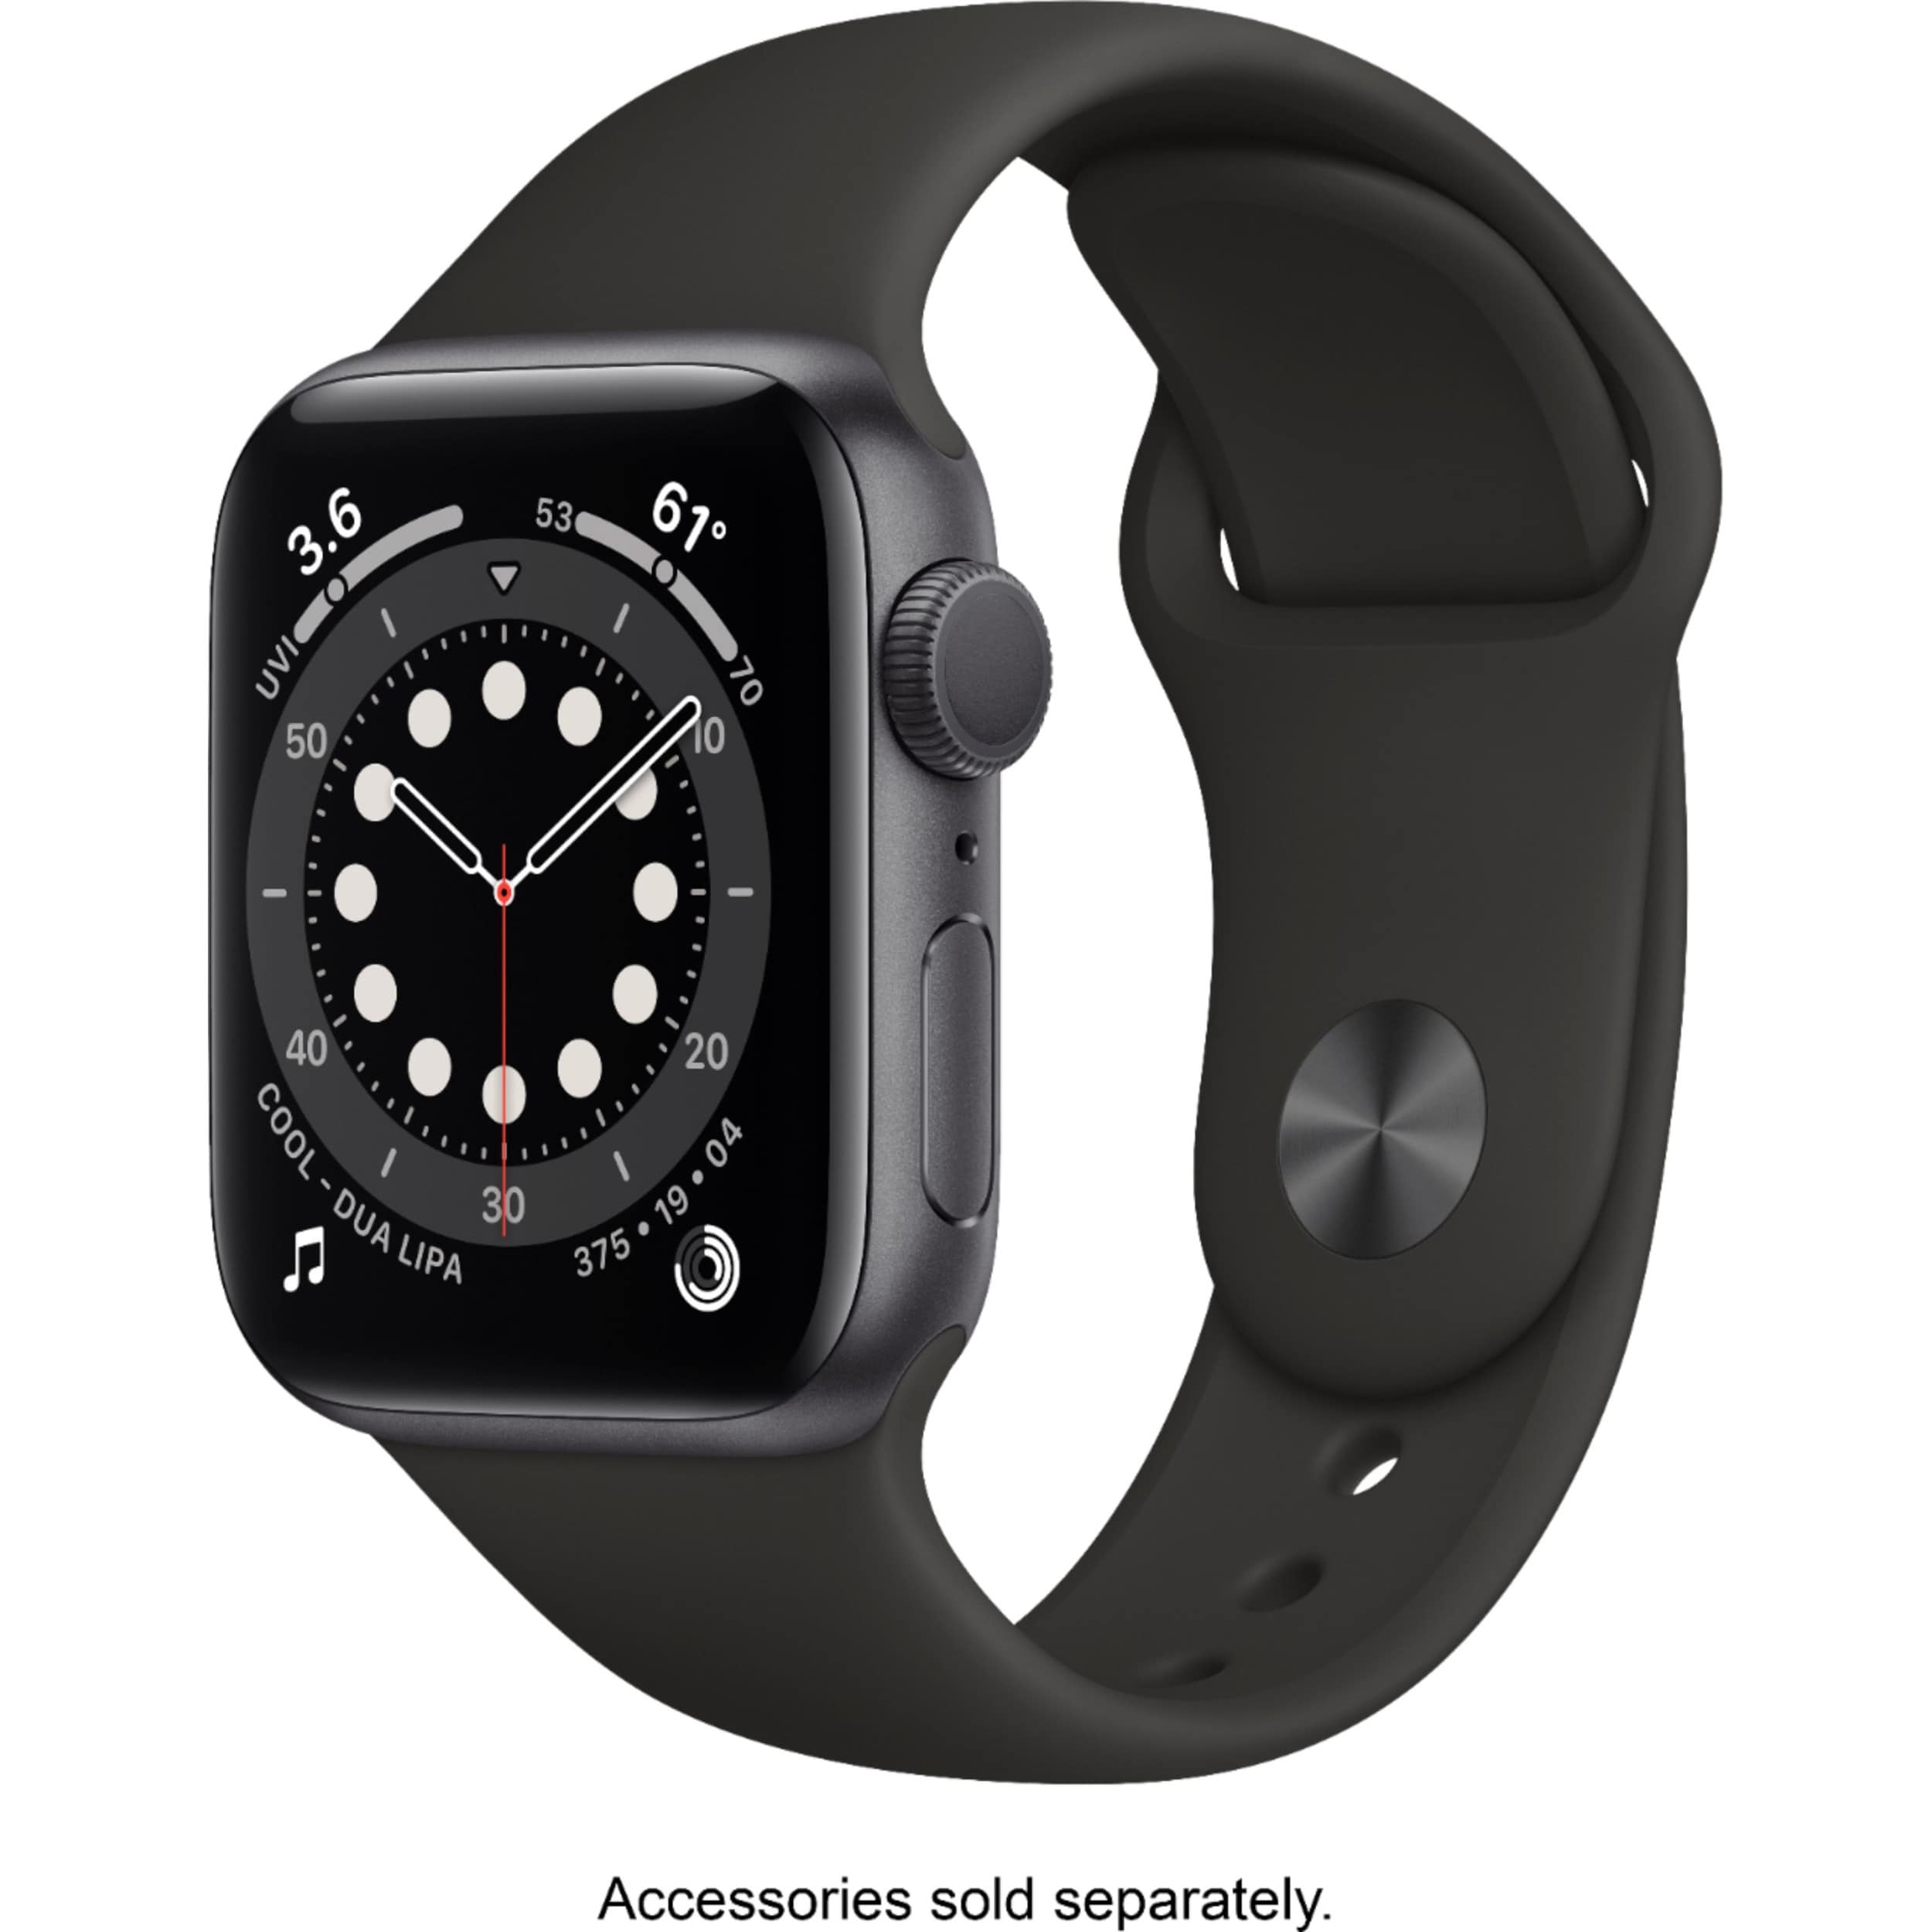 Apple Watch Series 6 (GPS, 40 and 44mm, Space Gray Aluminum, Black Sport Band)